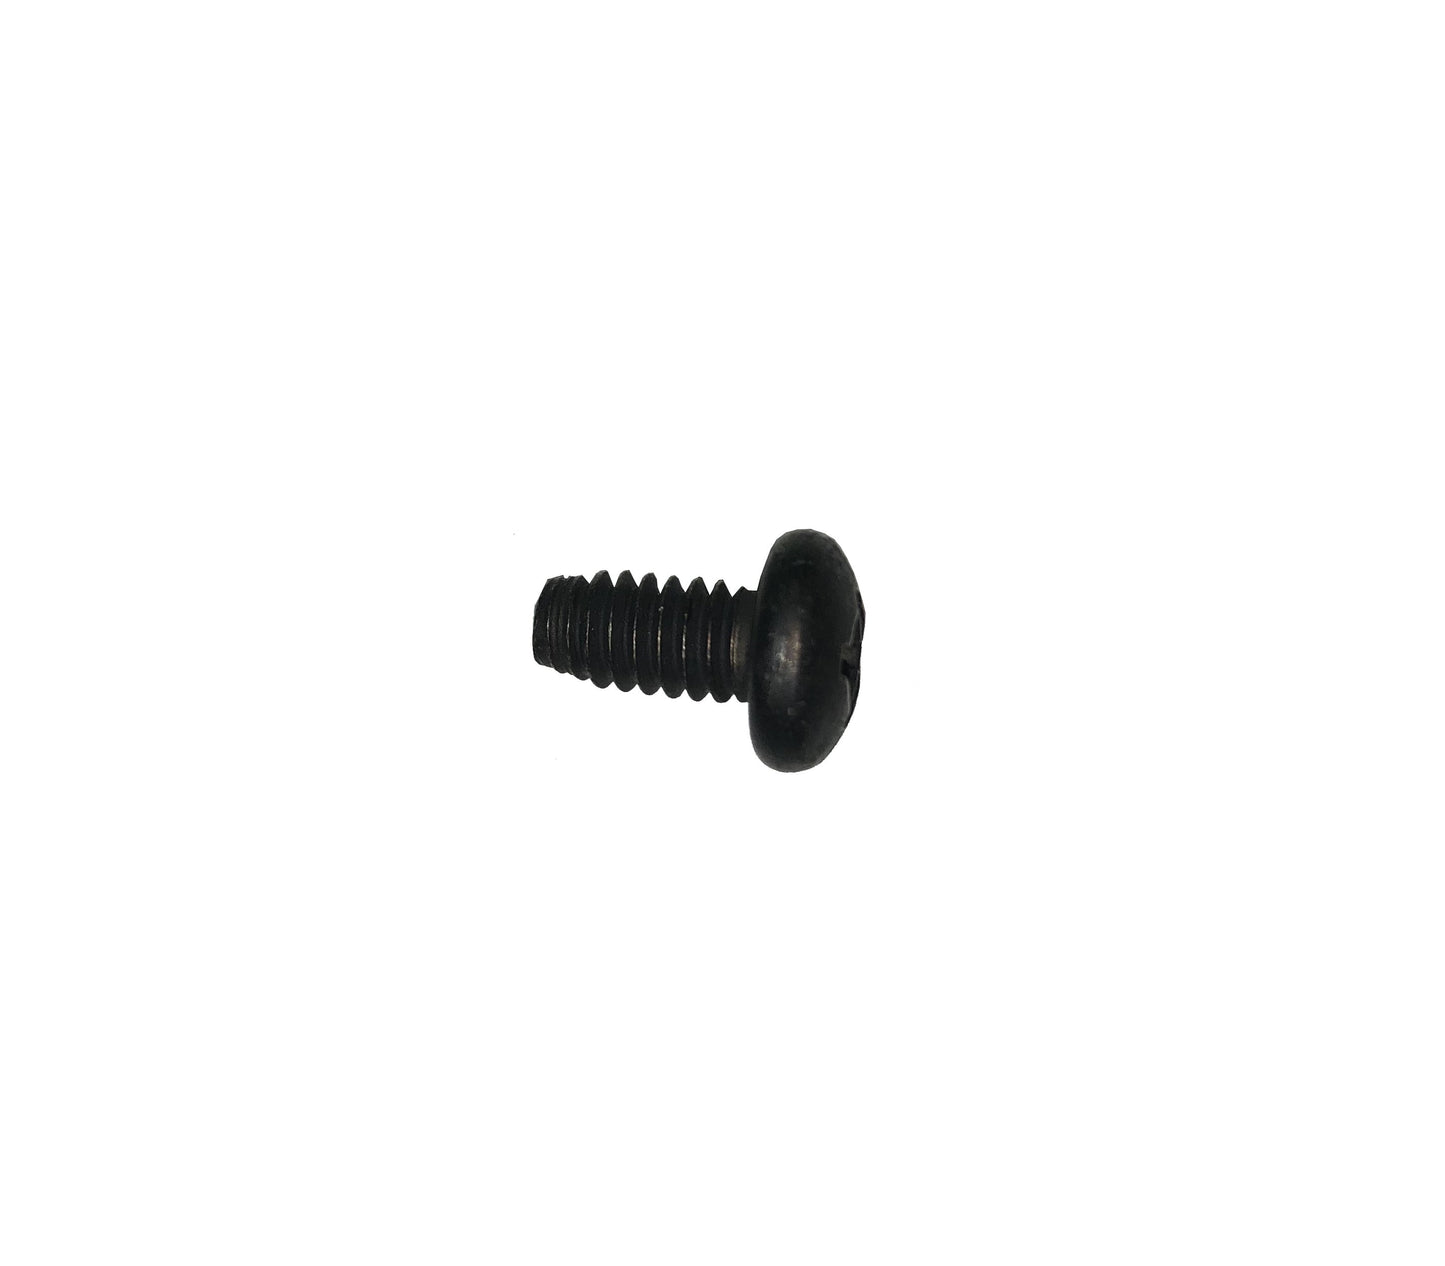 Broil King Y12865 Screw. Order your parts today with Barbecues Galore. 3 locations in the GTA: Burlington, Oakville & Etobicoke, Ontario. 2 in Calgary, Alberta.